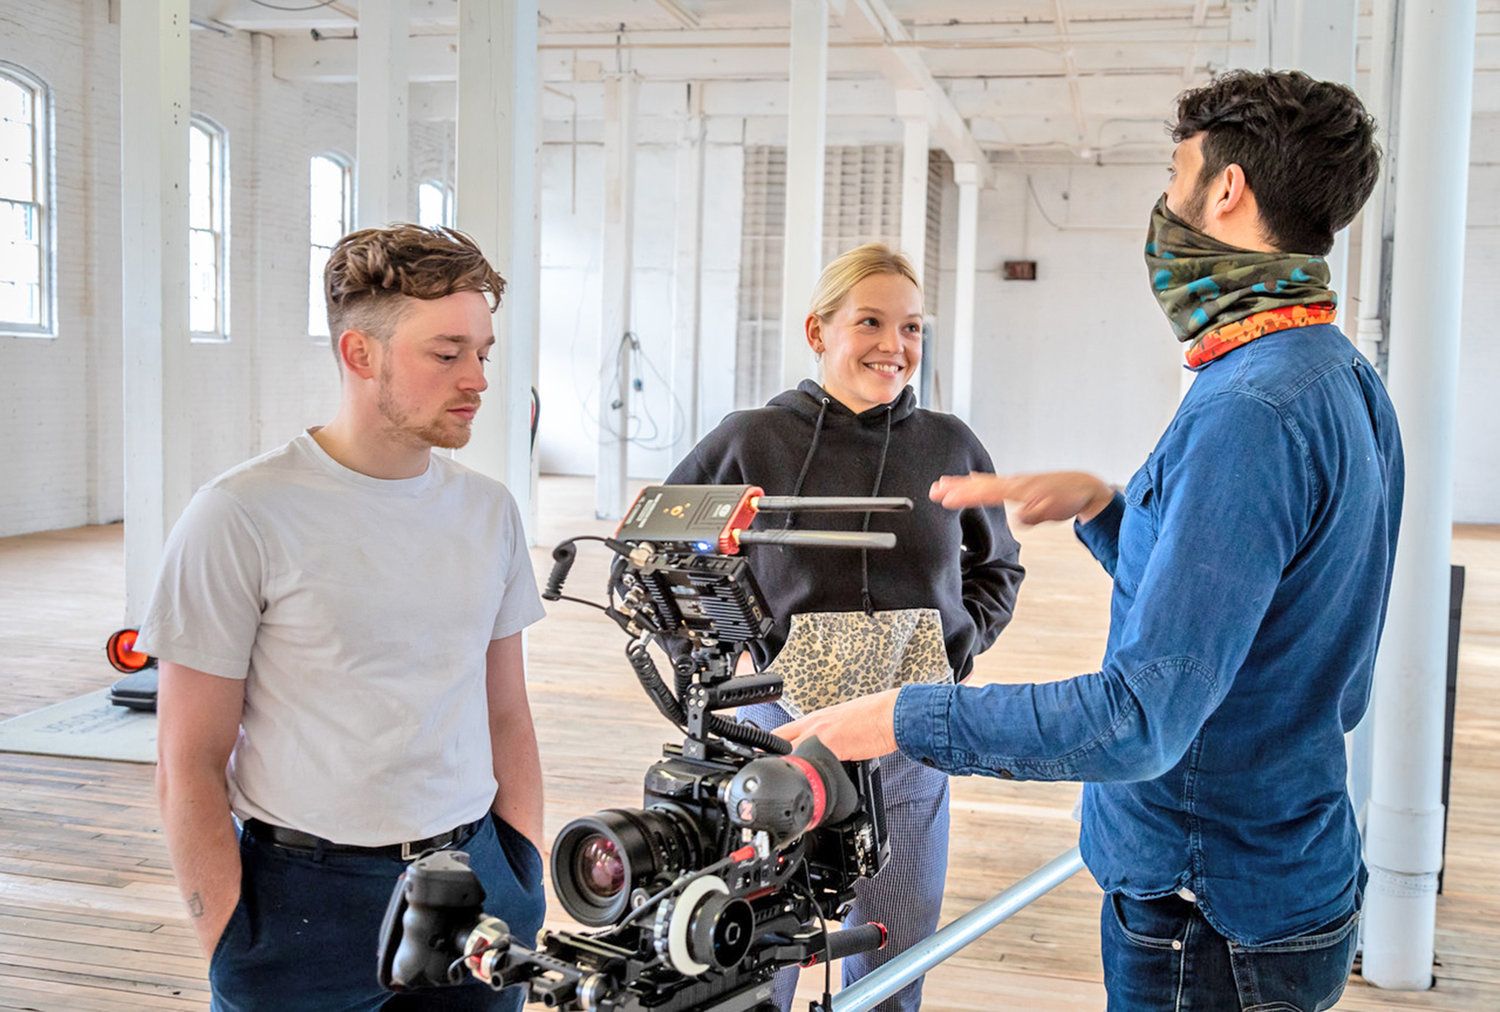 Nathan Nirschl, Hannah Straney, and filmmaker Adam Muro discuss the filming of their as yet, untitled work. The project was organized by The Creative Outpost, Inc.